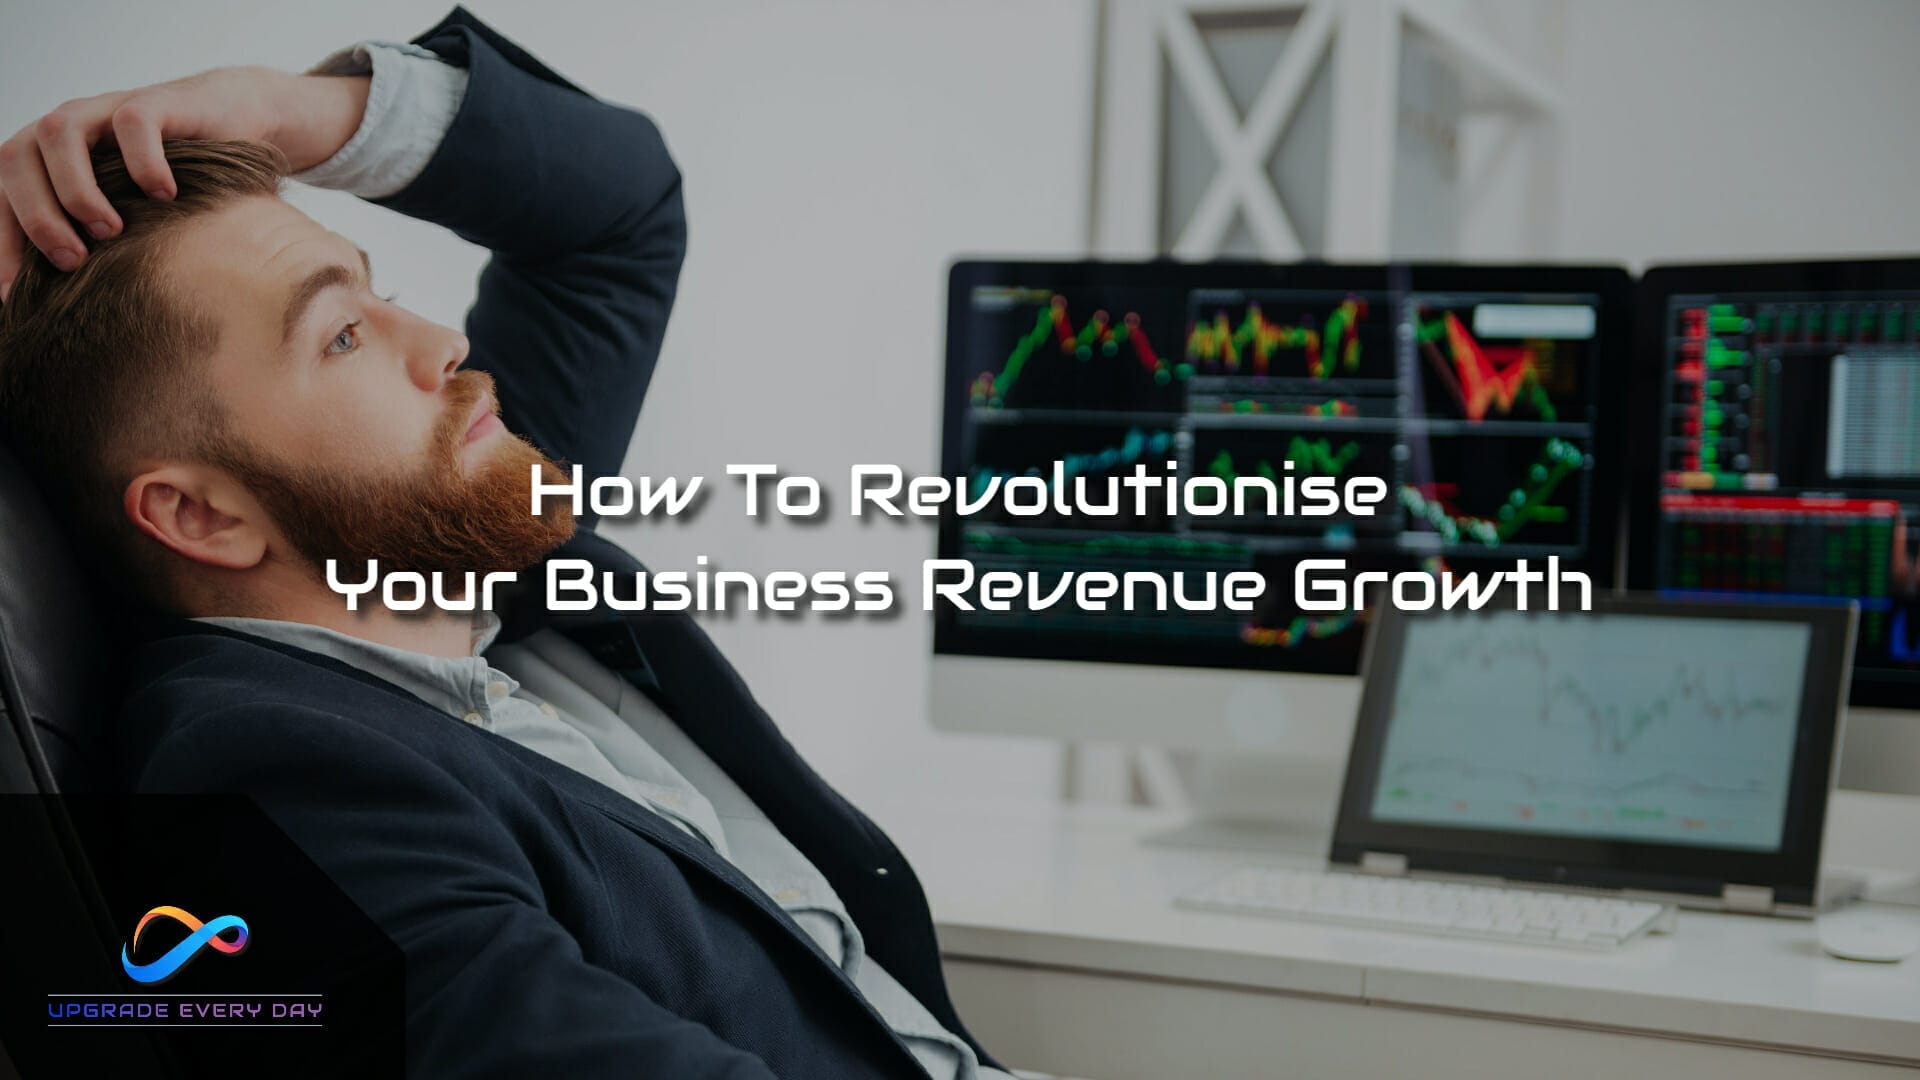 How To Revolutionise Your Business Revenue Growth